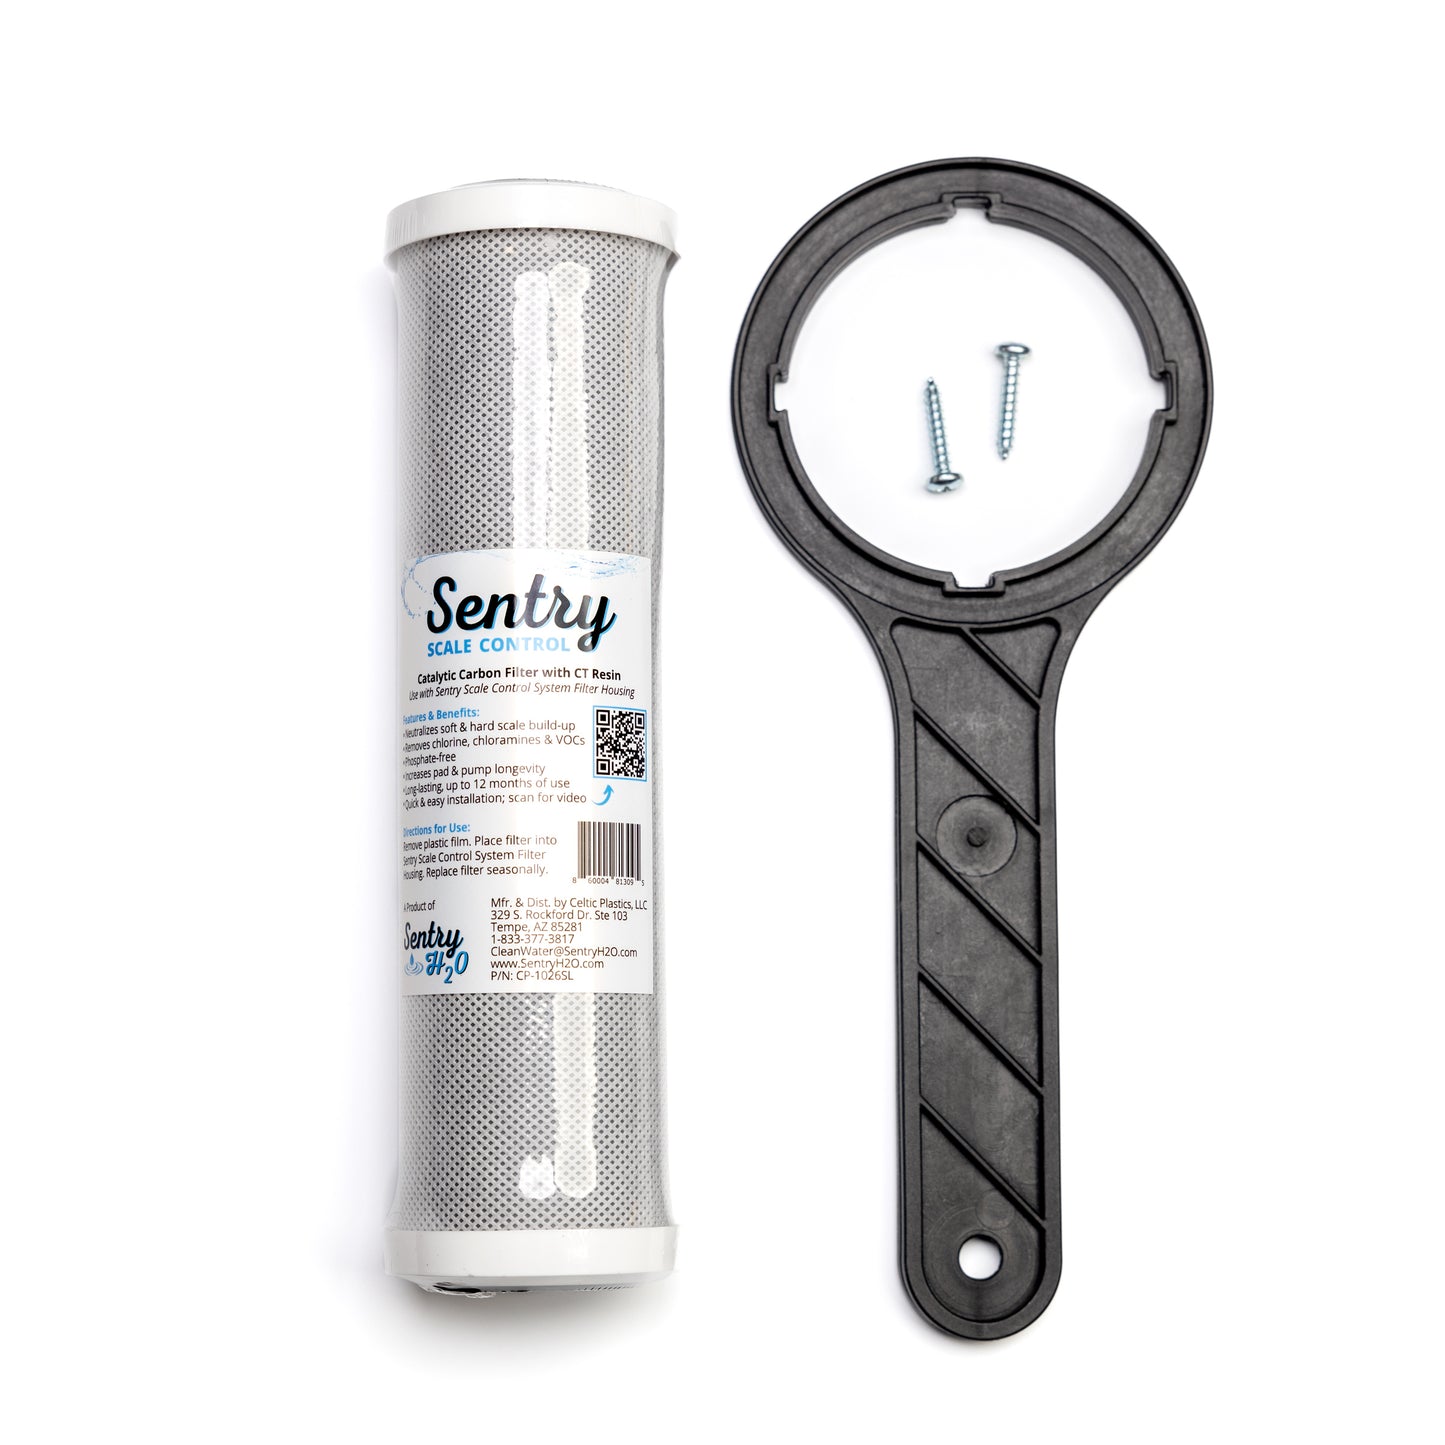 Sentry Scale Control - Filter Wrench